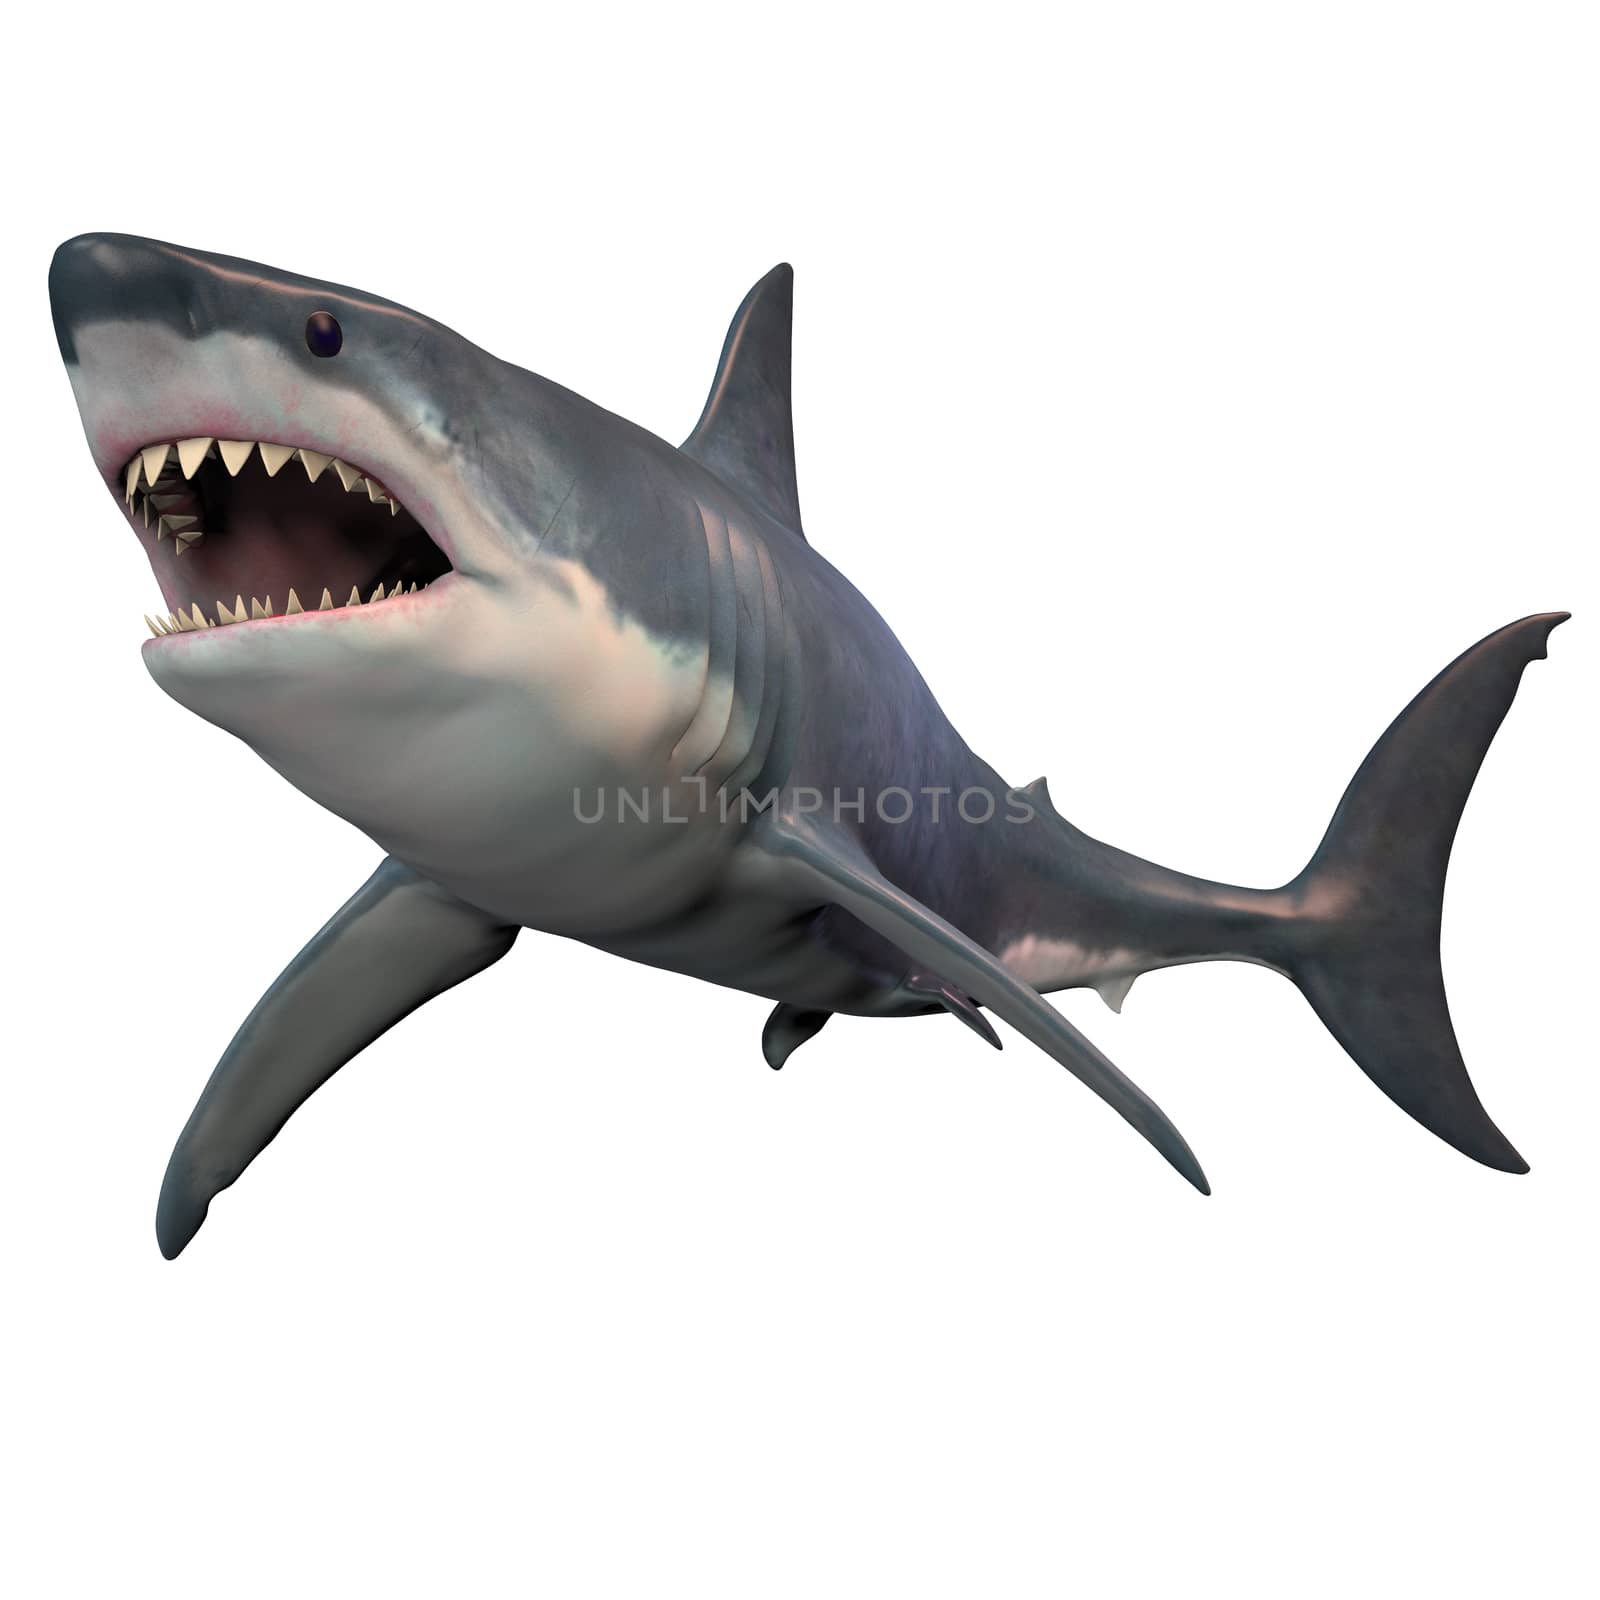 The Great White shark can grow over 8 meters or 26 feet and live to 70 years of age.